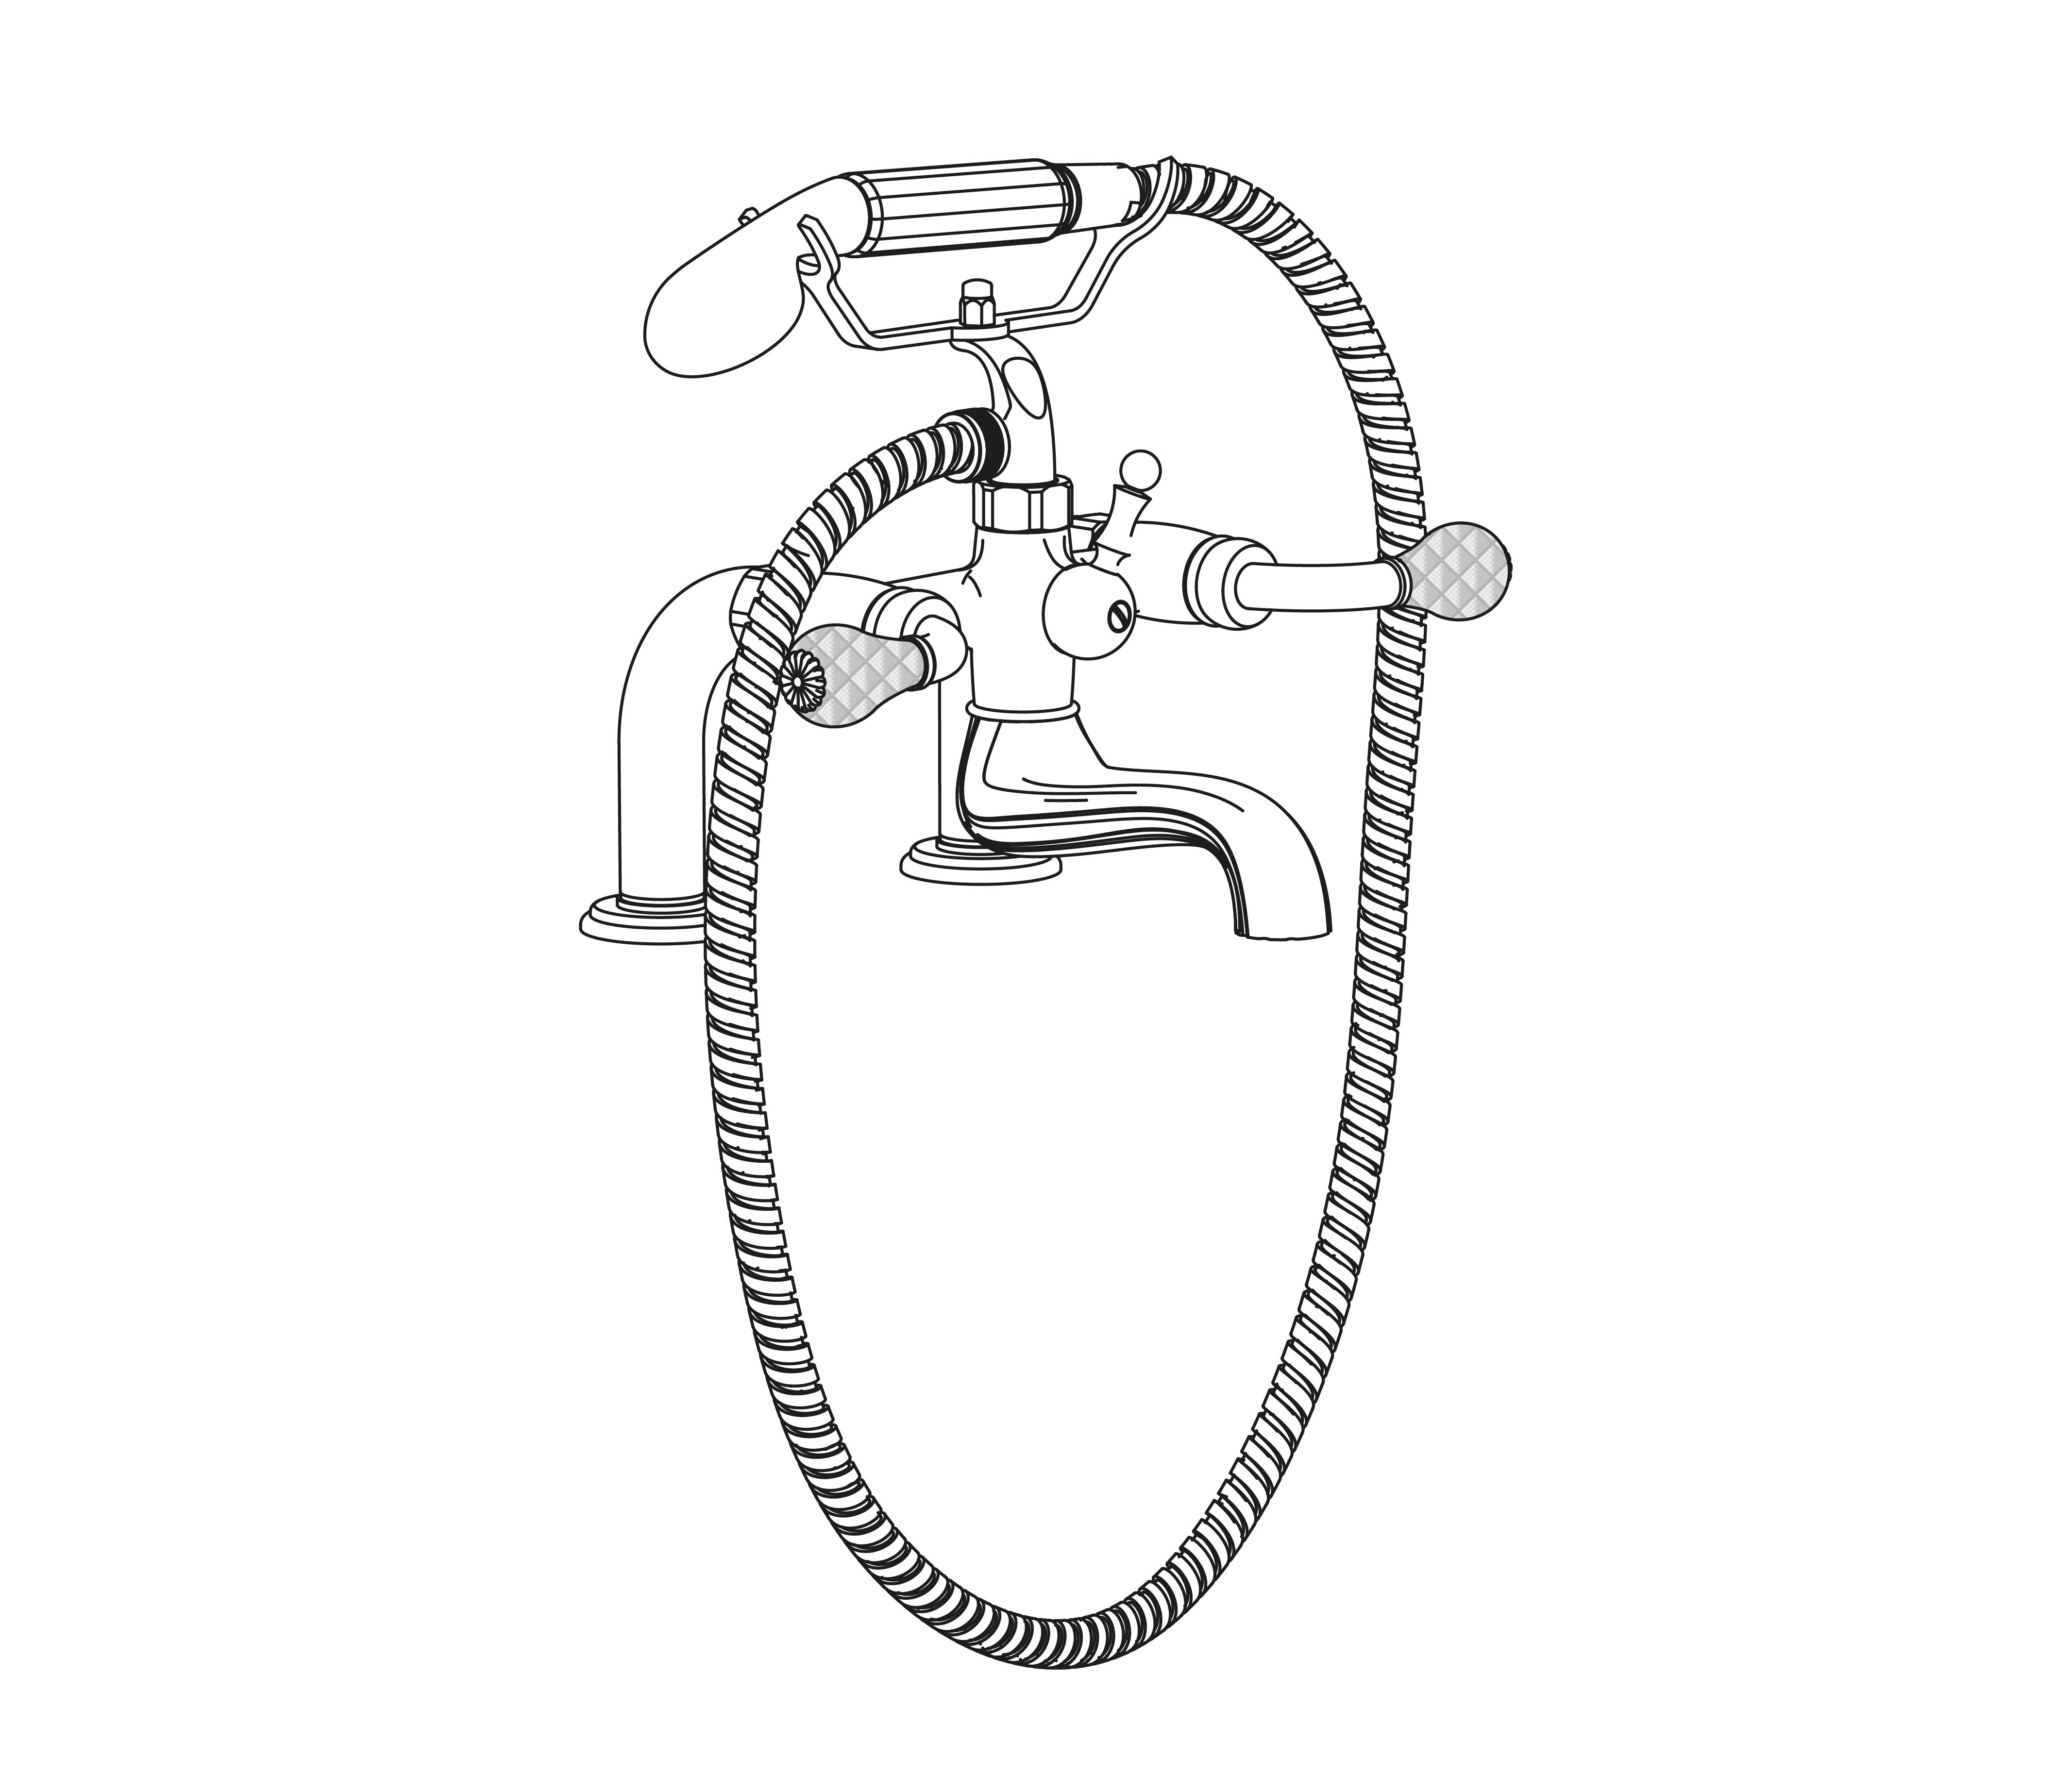 C62-3306 Rim mounted bath and shower mixer